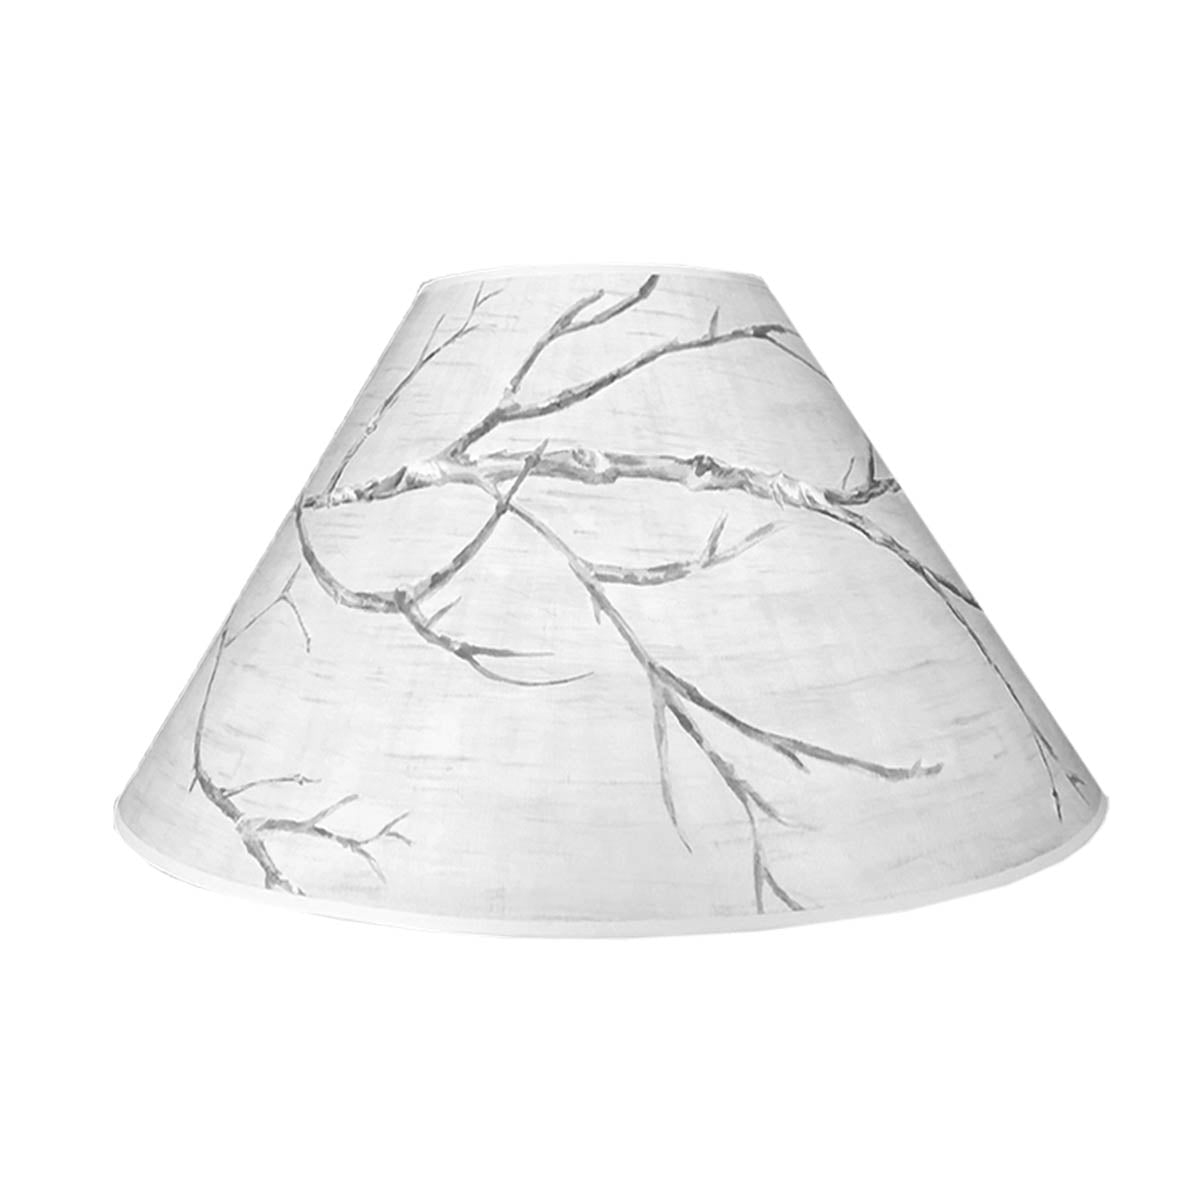 Janna Ugone & Co Lamp Shades Medium Conical Lamp Shade in Sweeping Branch